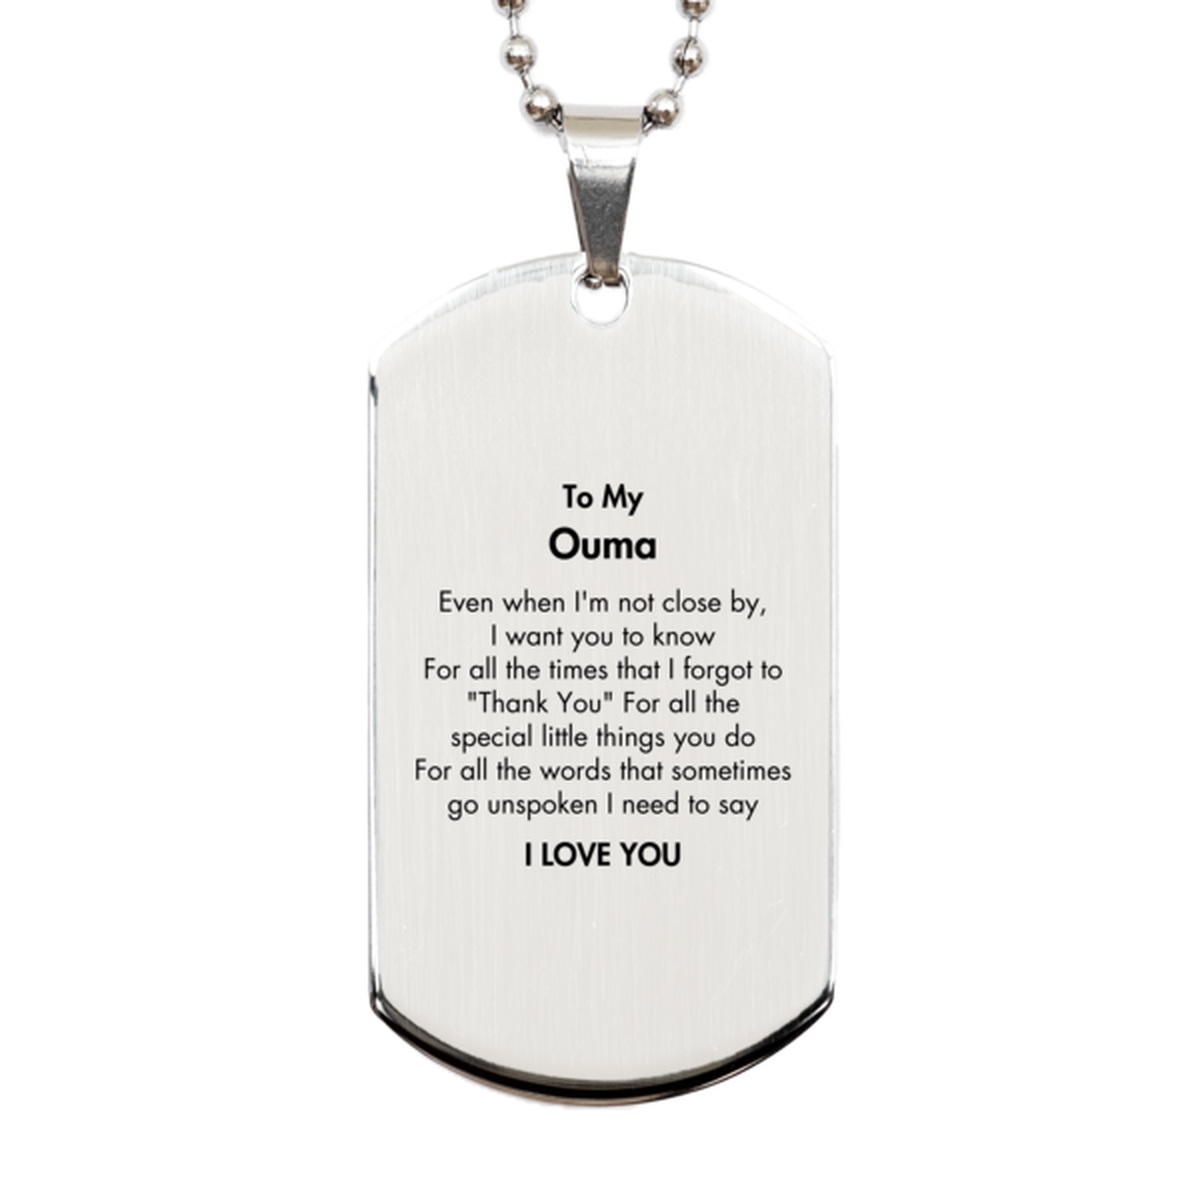 Thank You Gifts for Ouma, Keepsake Silver Dog Tag Gifts for Ouma Birthday Mother's day Father's Day Ouma For all the words That sometimes go unspoken I need to say I LOVE YOU